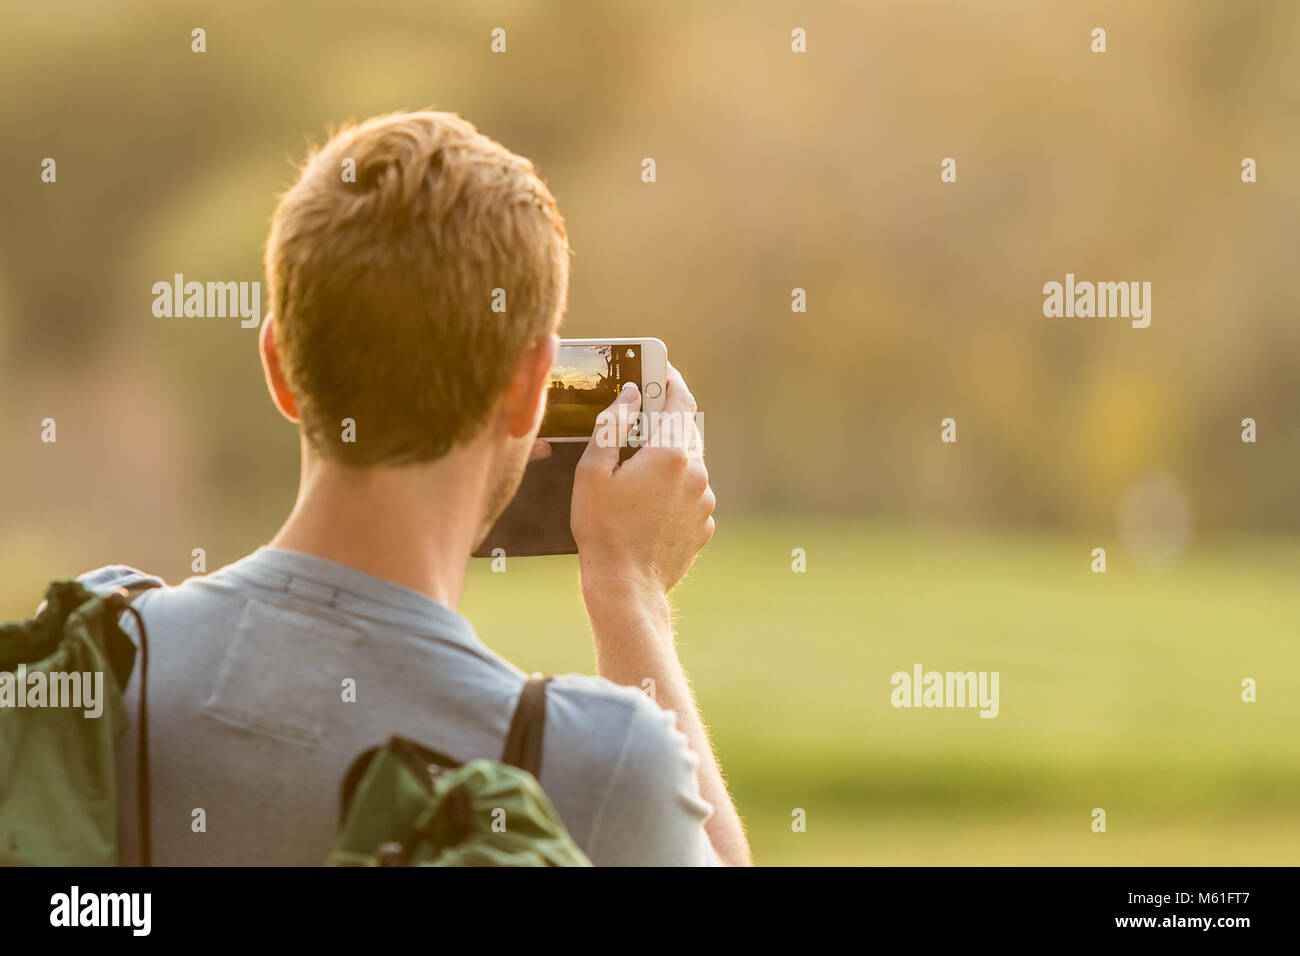 Young man taking a photo on his phone in a park Stock Photo